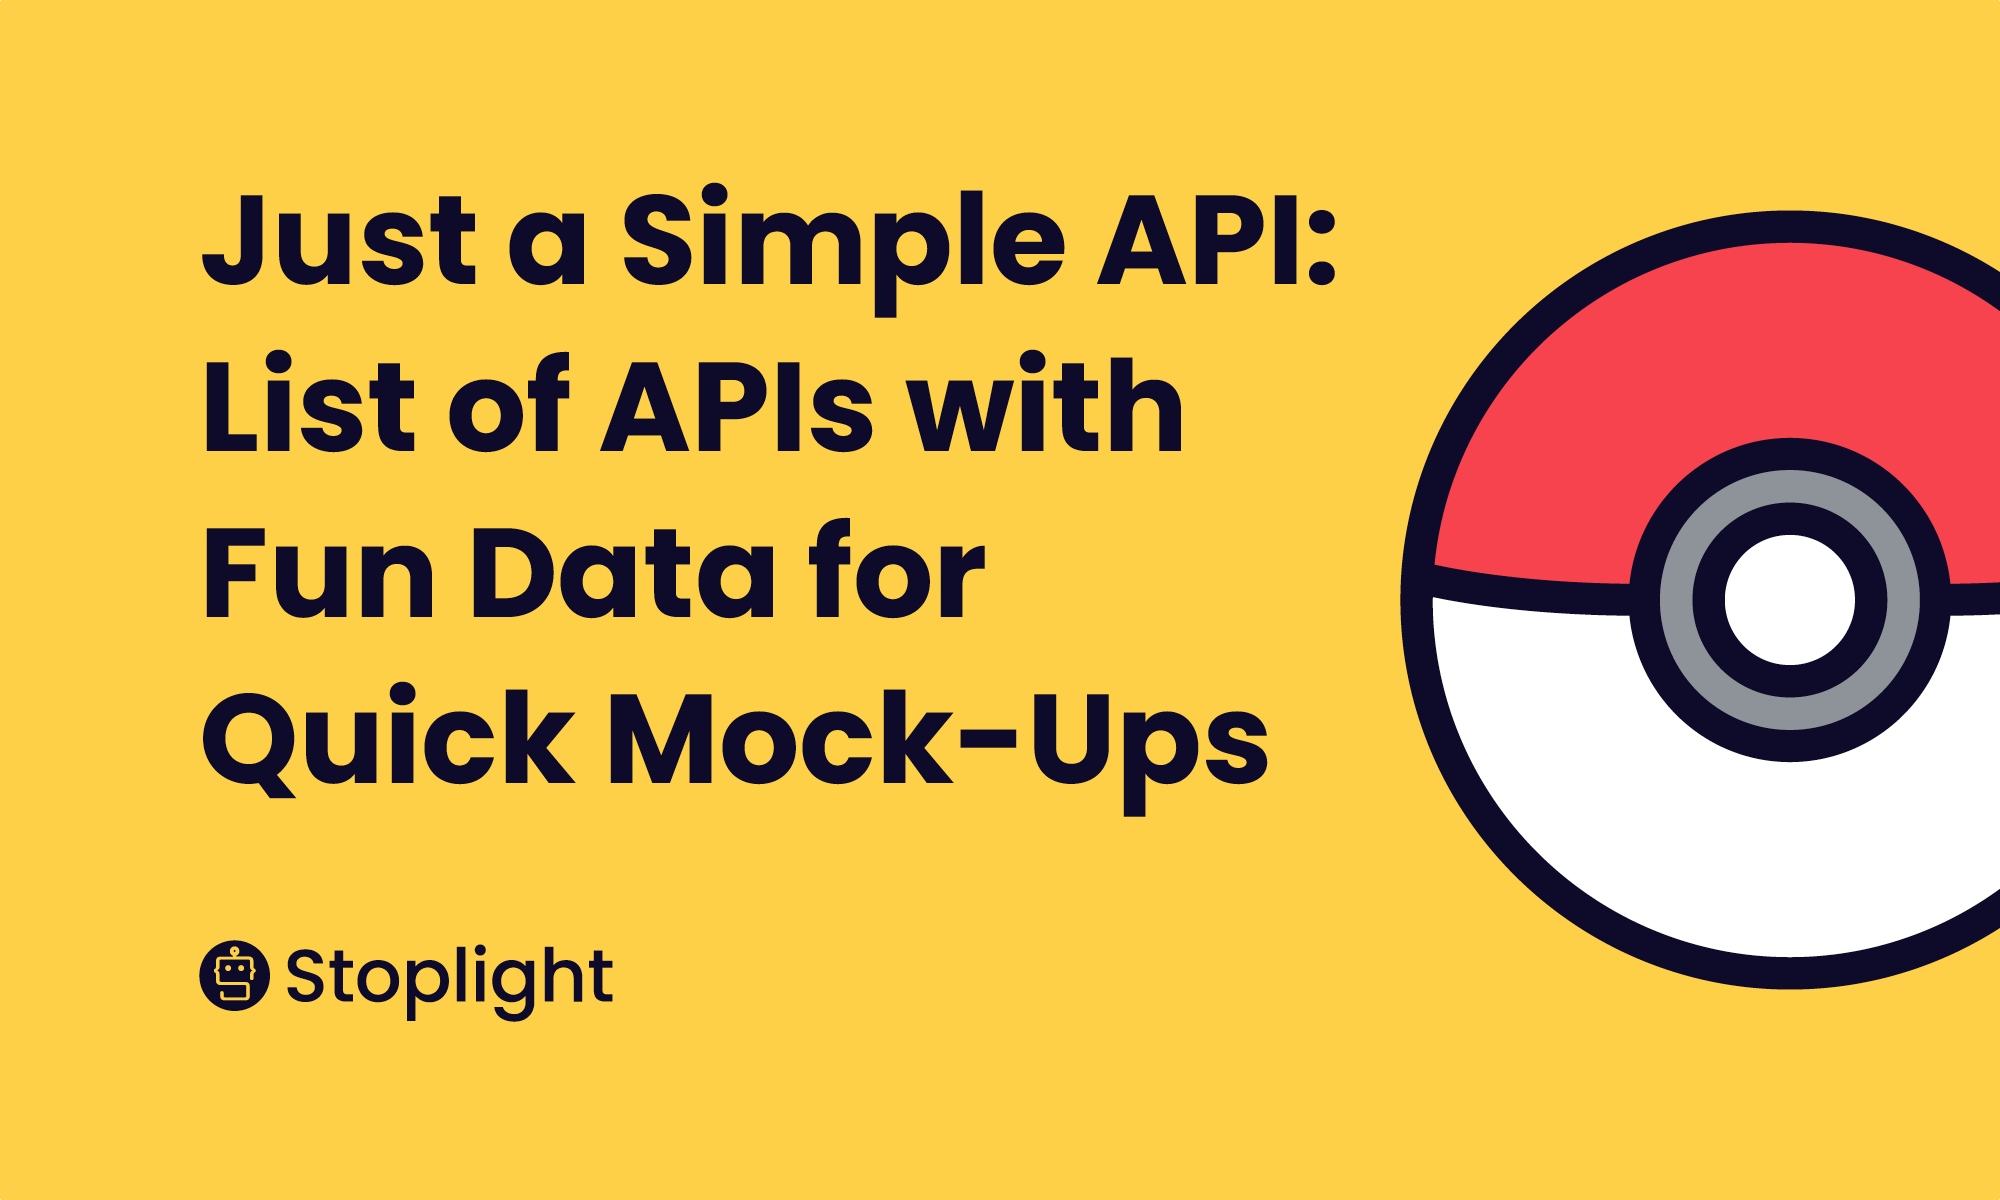 Just a Simple API: List of APIs with Fun Data for Quick Mock-ups